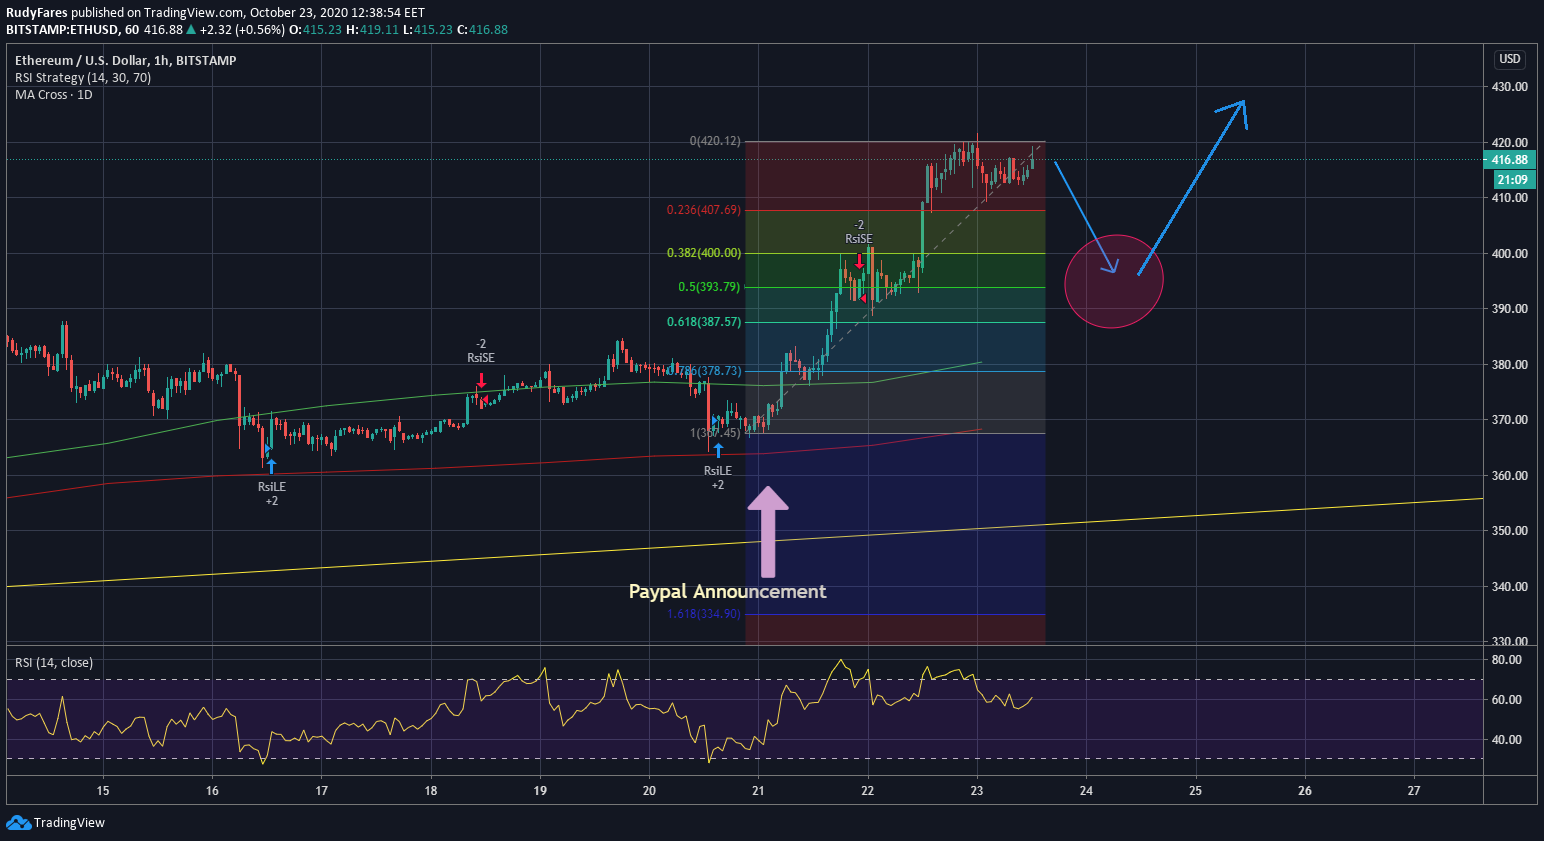 ETH/USD price 1H chart showing scenario 1 previously forecasted